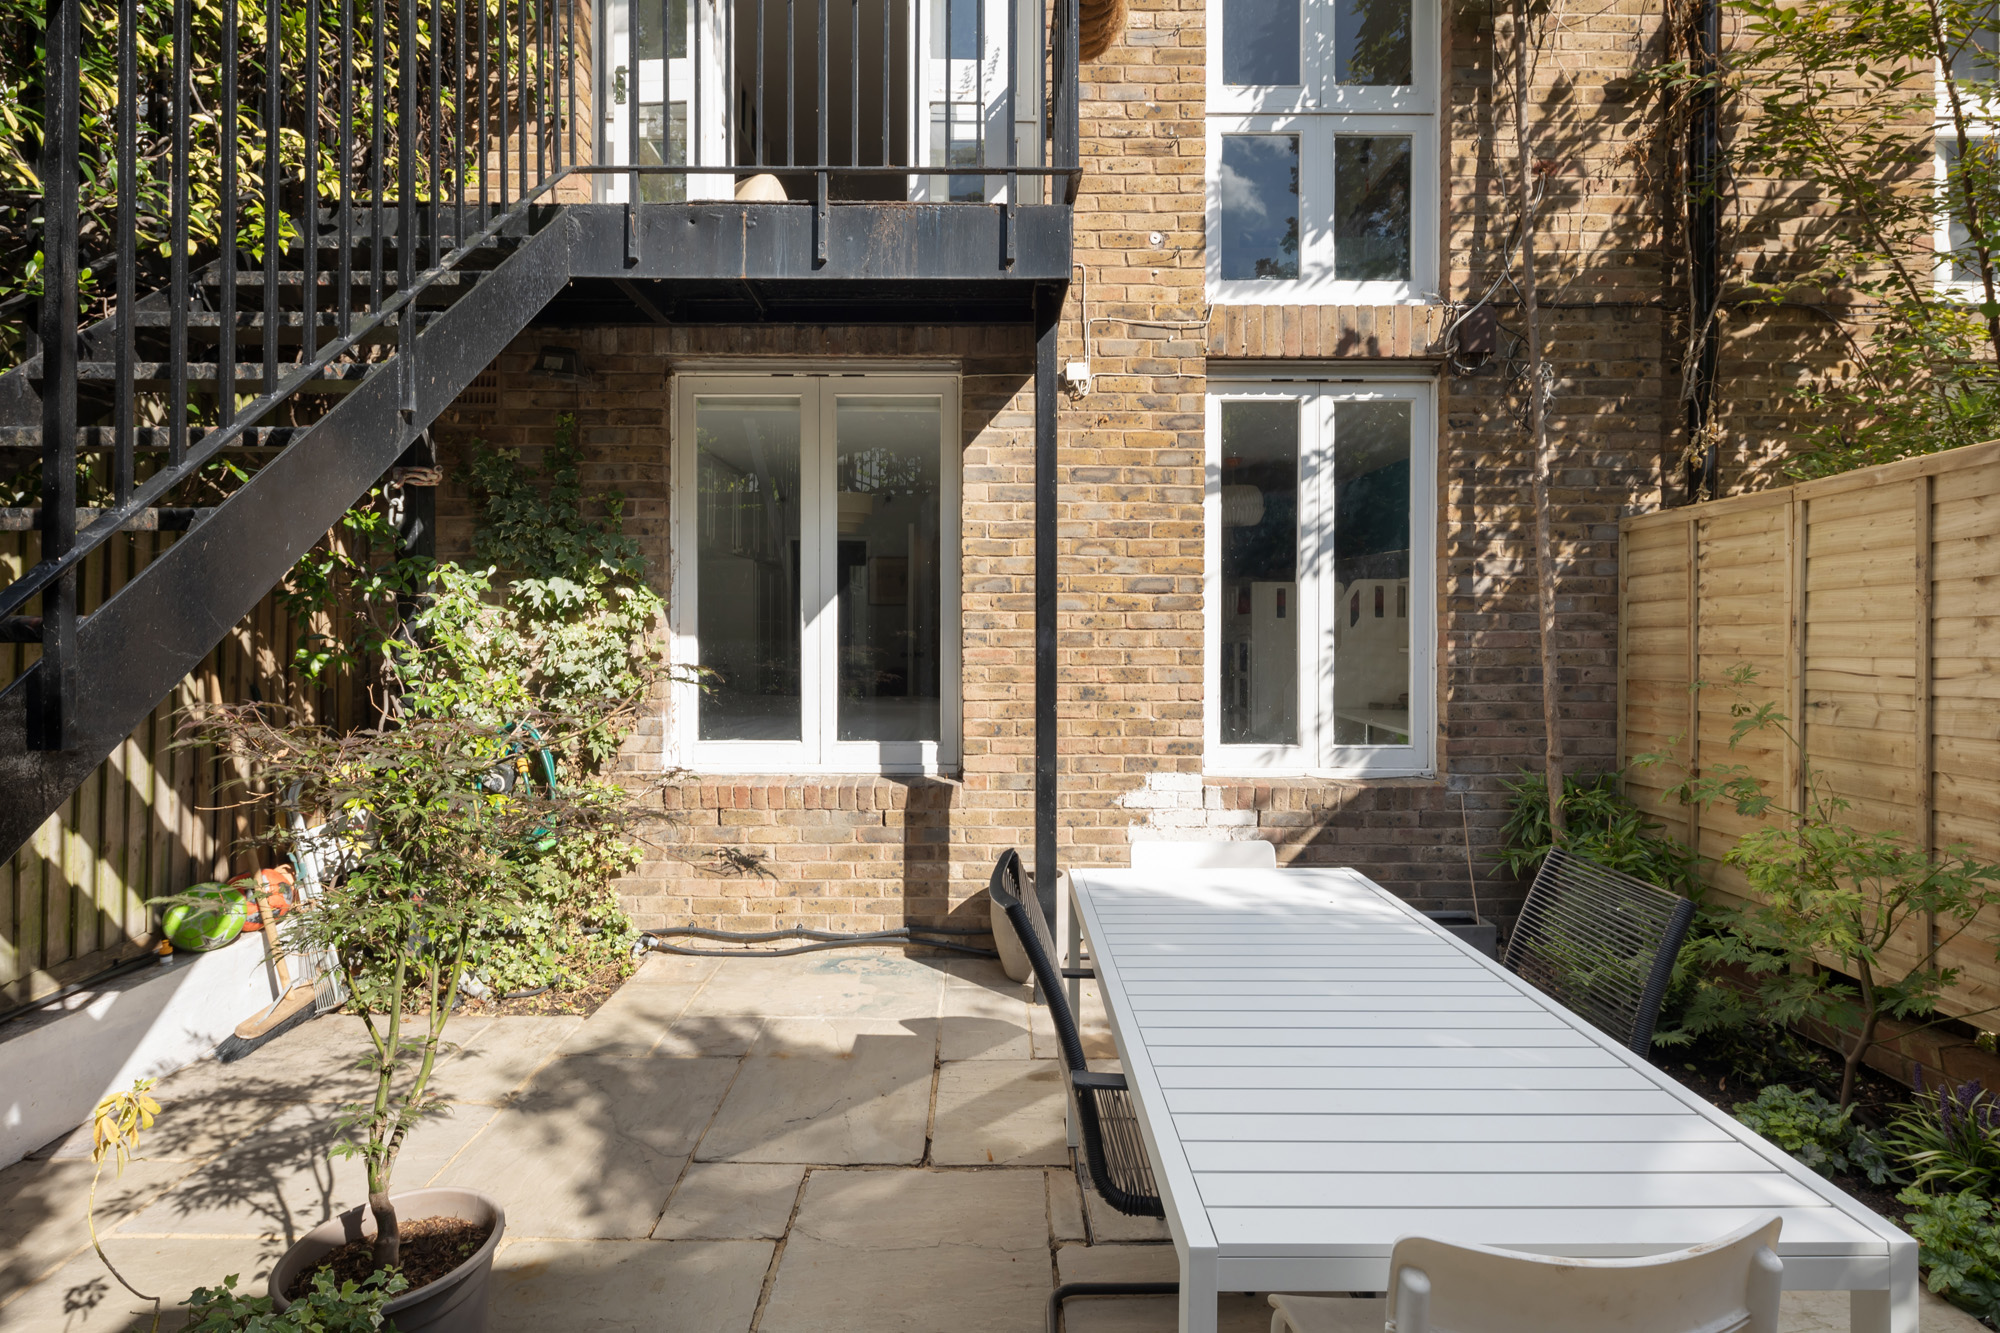 For Sale: Powis Square Notting Hill W11 private patio garden